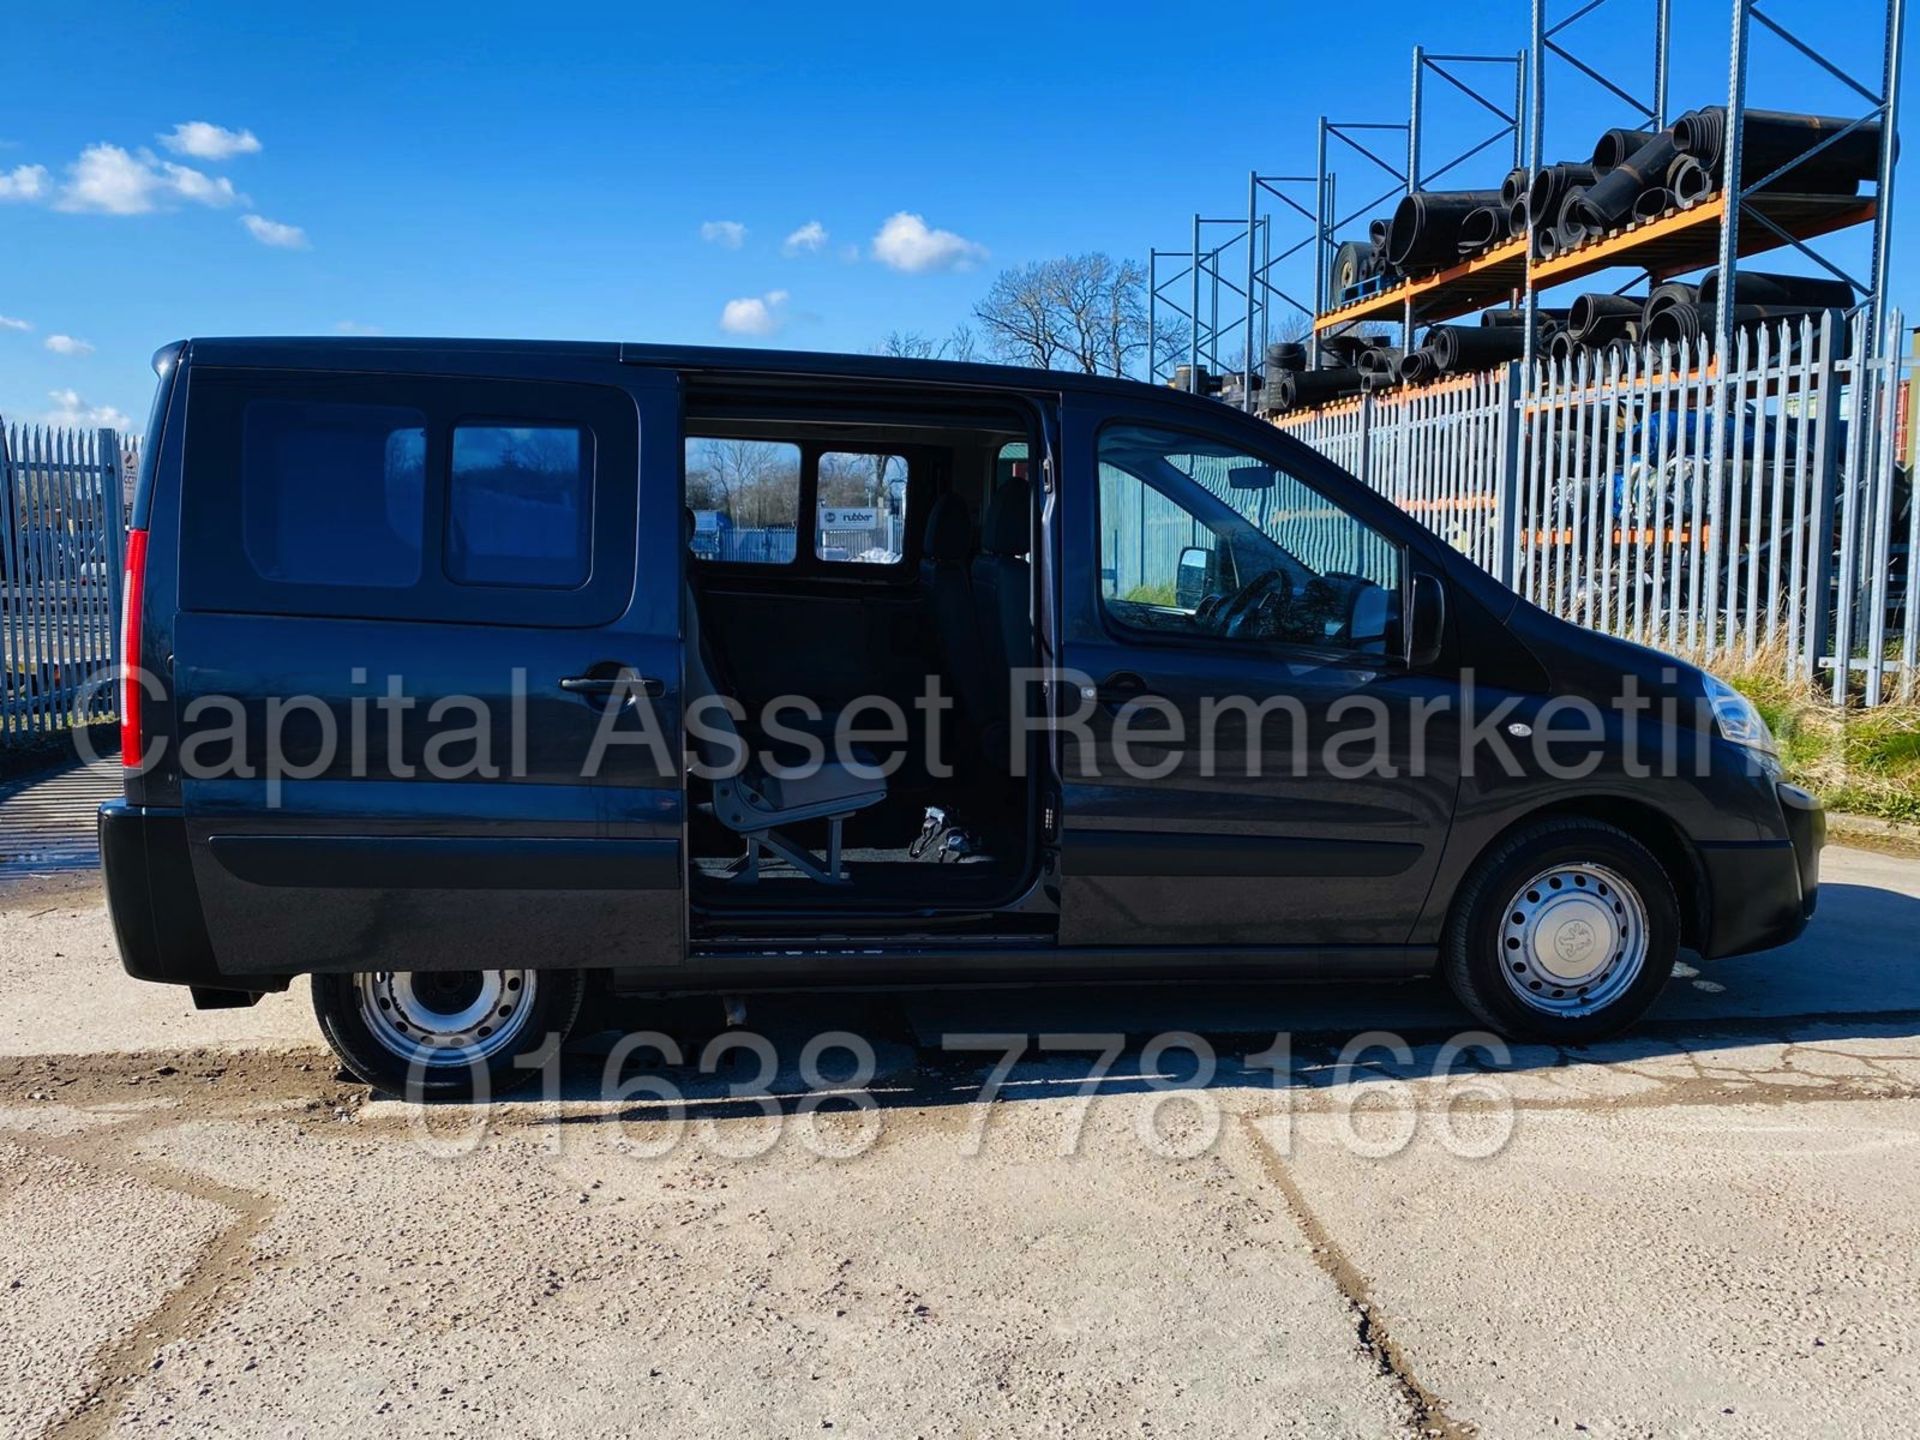 (On Sale) PEUGEOT EXPERT *TEPEE COMFORT* (61 REG) *DISABILITY / WHEEL CHAIR ACCESS VEHICLE* (NO VAT) - Image 27 of 30